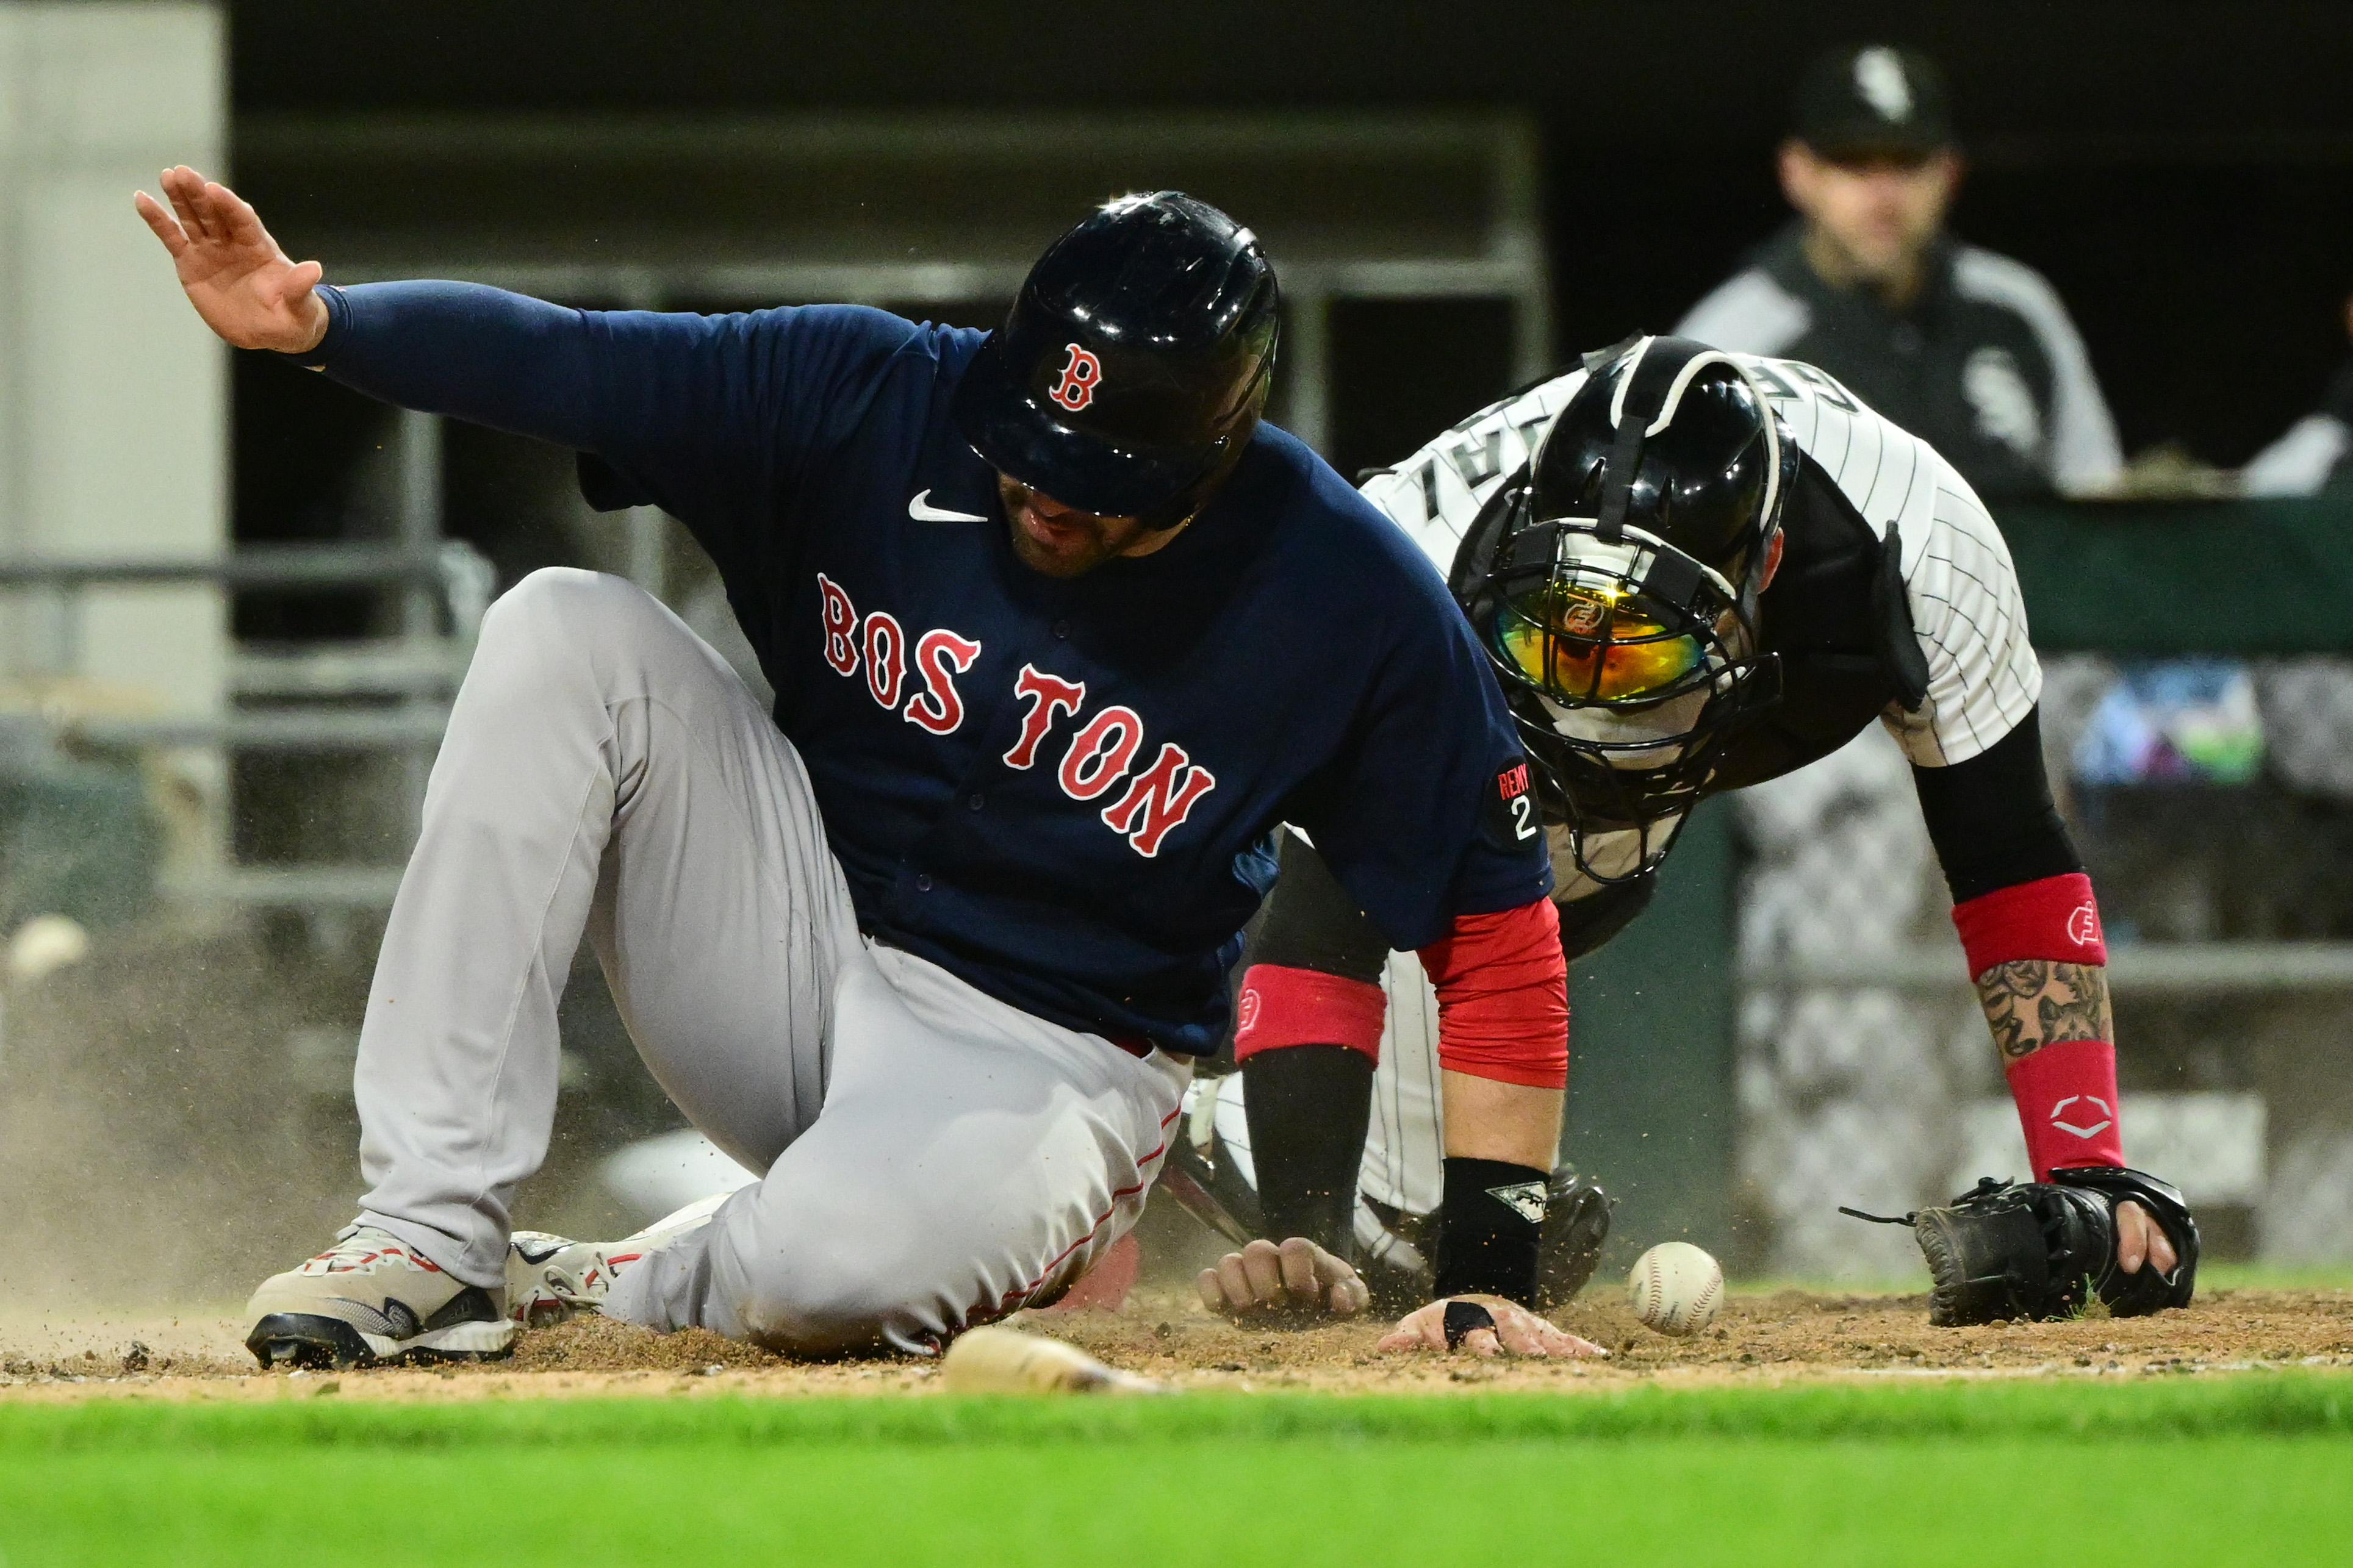 Chris Sale's injury problems continue to hamper Red Sox